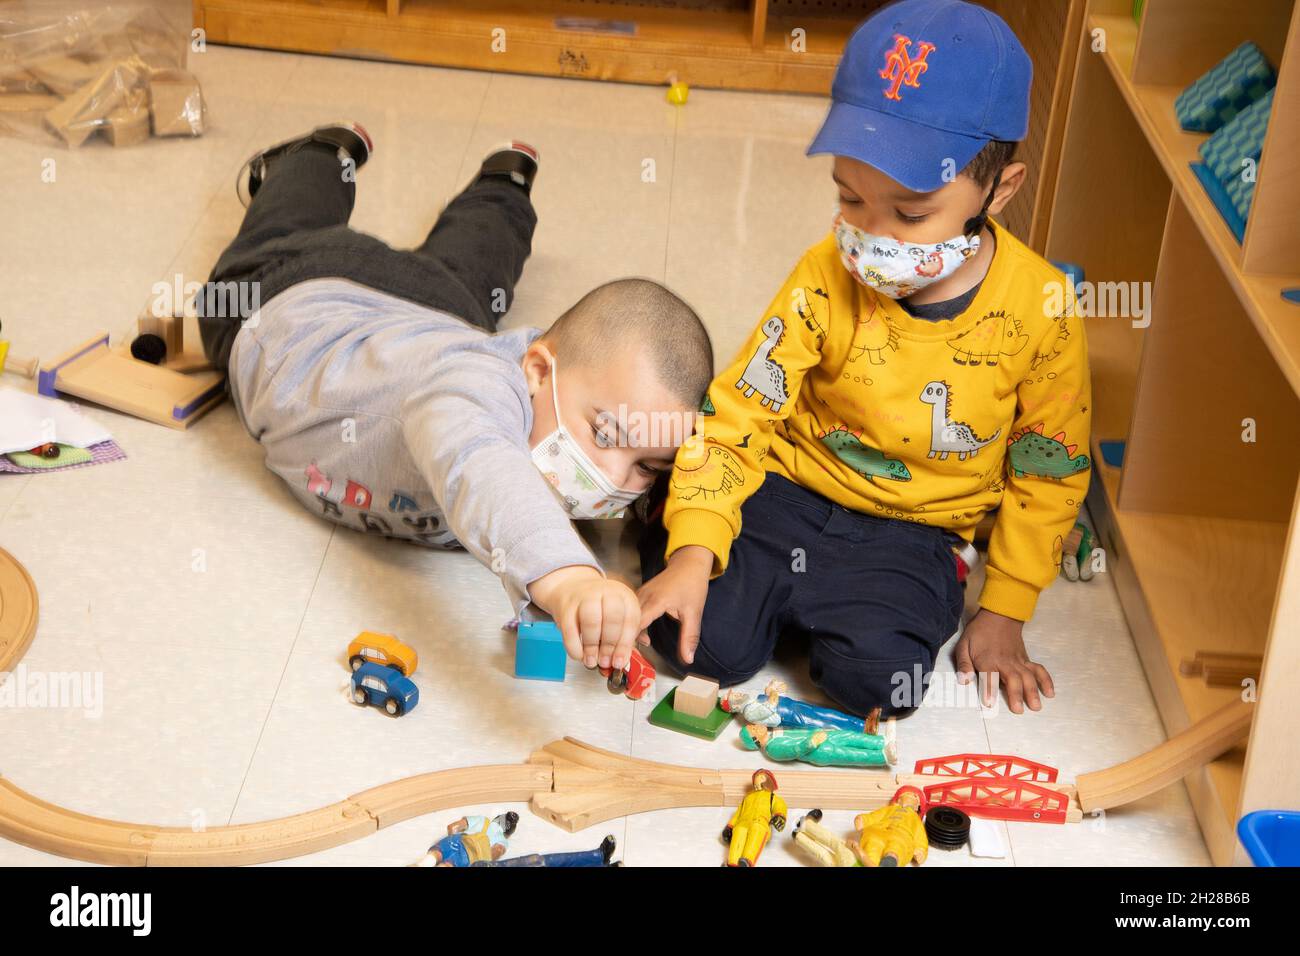 Education Preschool 3-4 year olds two boys playing together in block area, playing with train set and people figures, wearing face masks Covid-19 Stock Photo